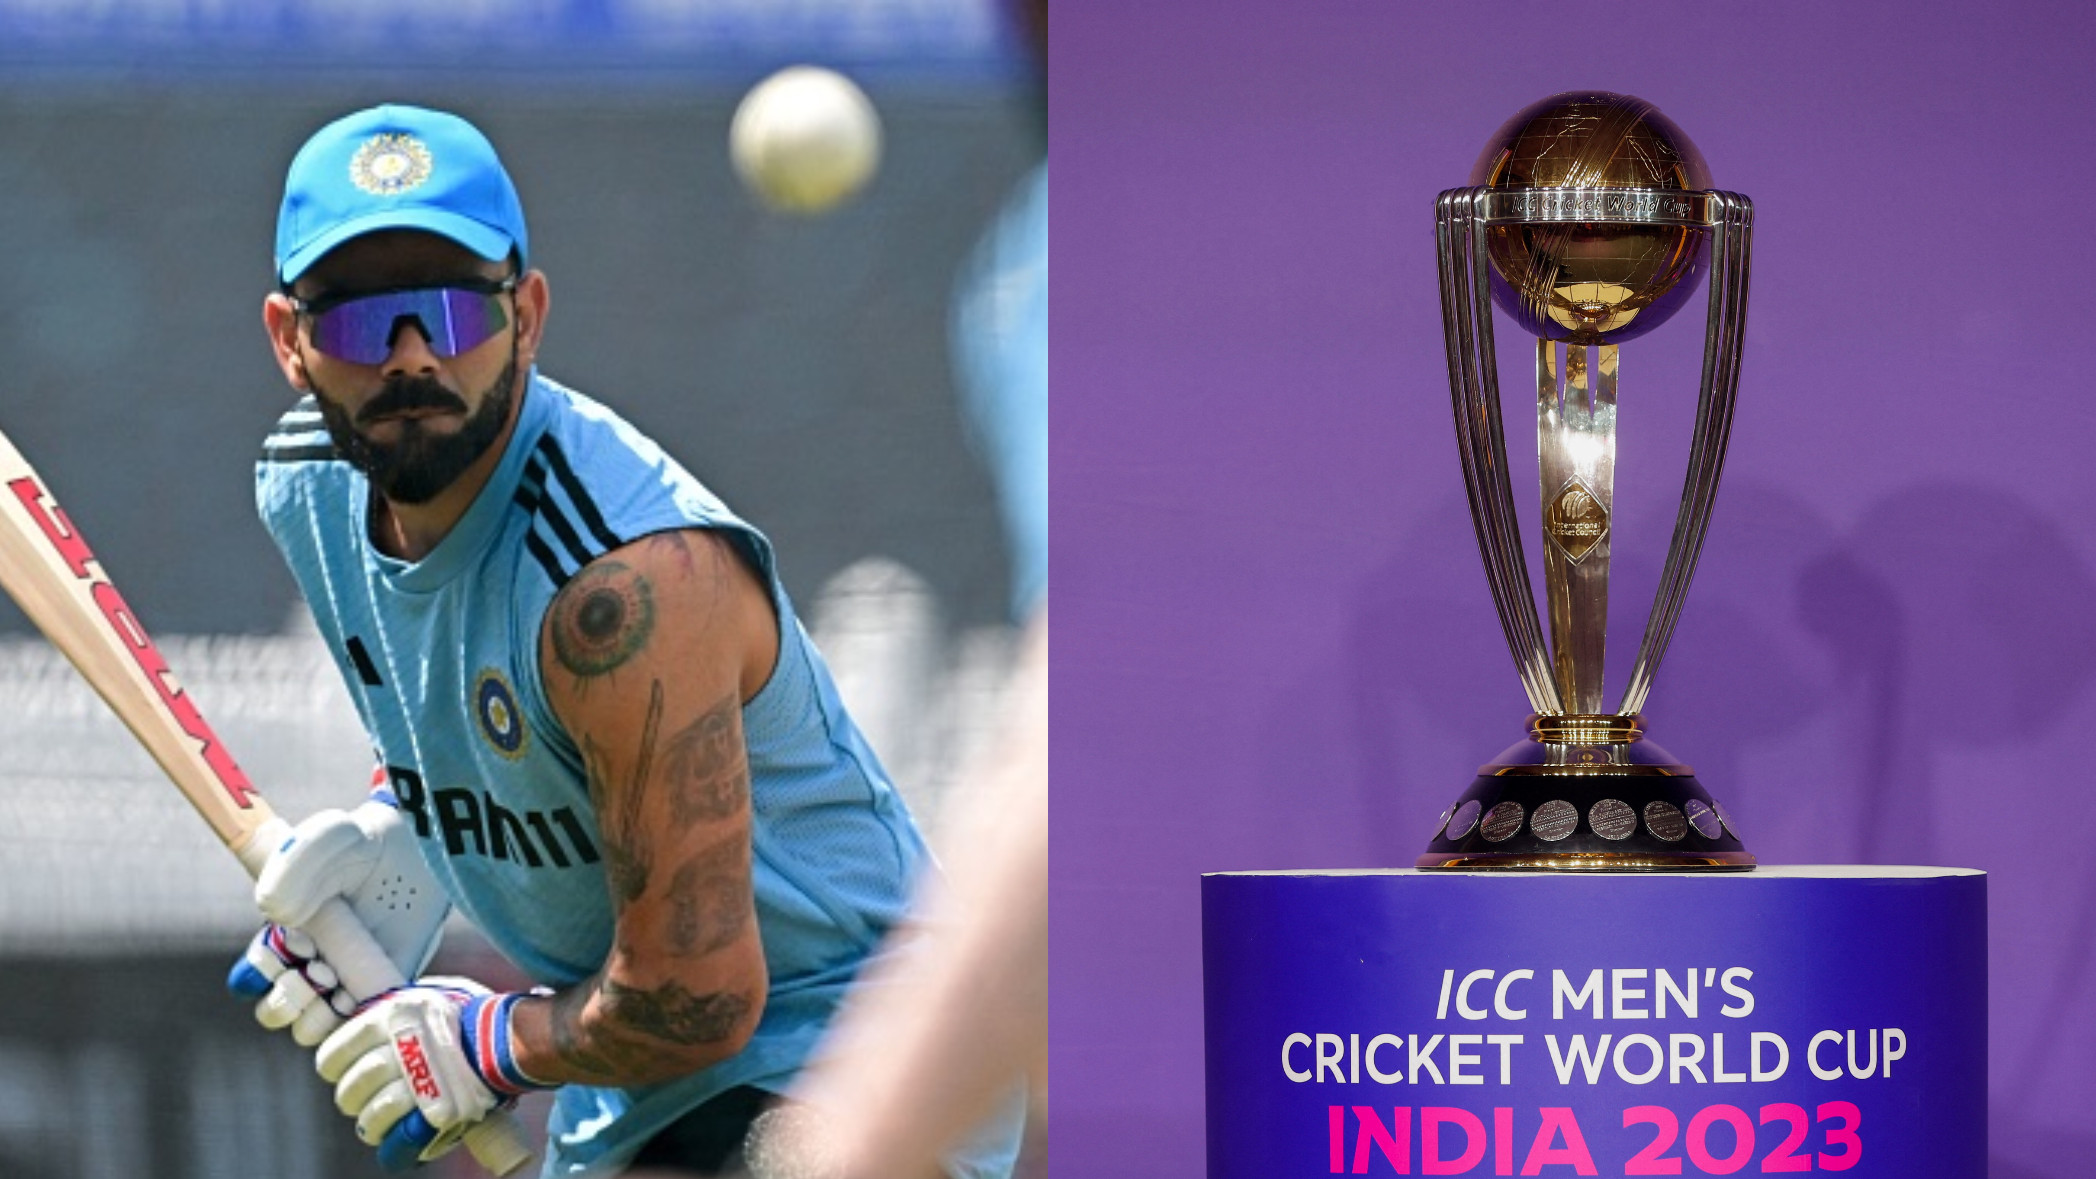 CWC 2023: “We want to create new memories for our fans”- Virat Kohli ahead of World Cup 2023